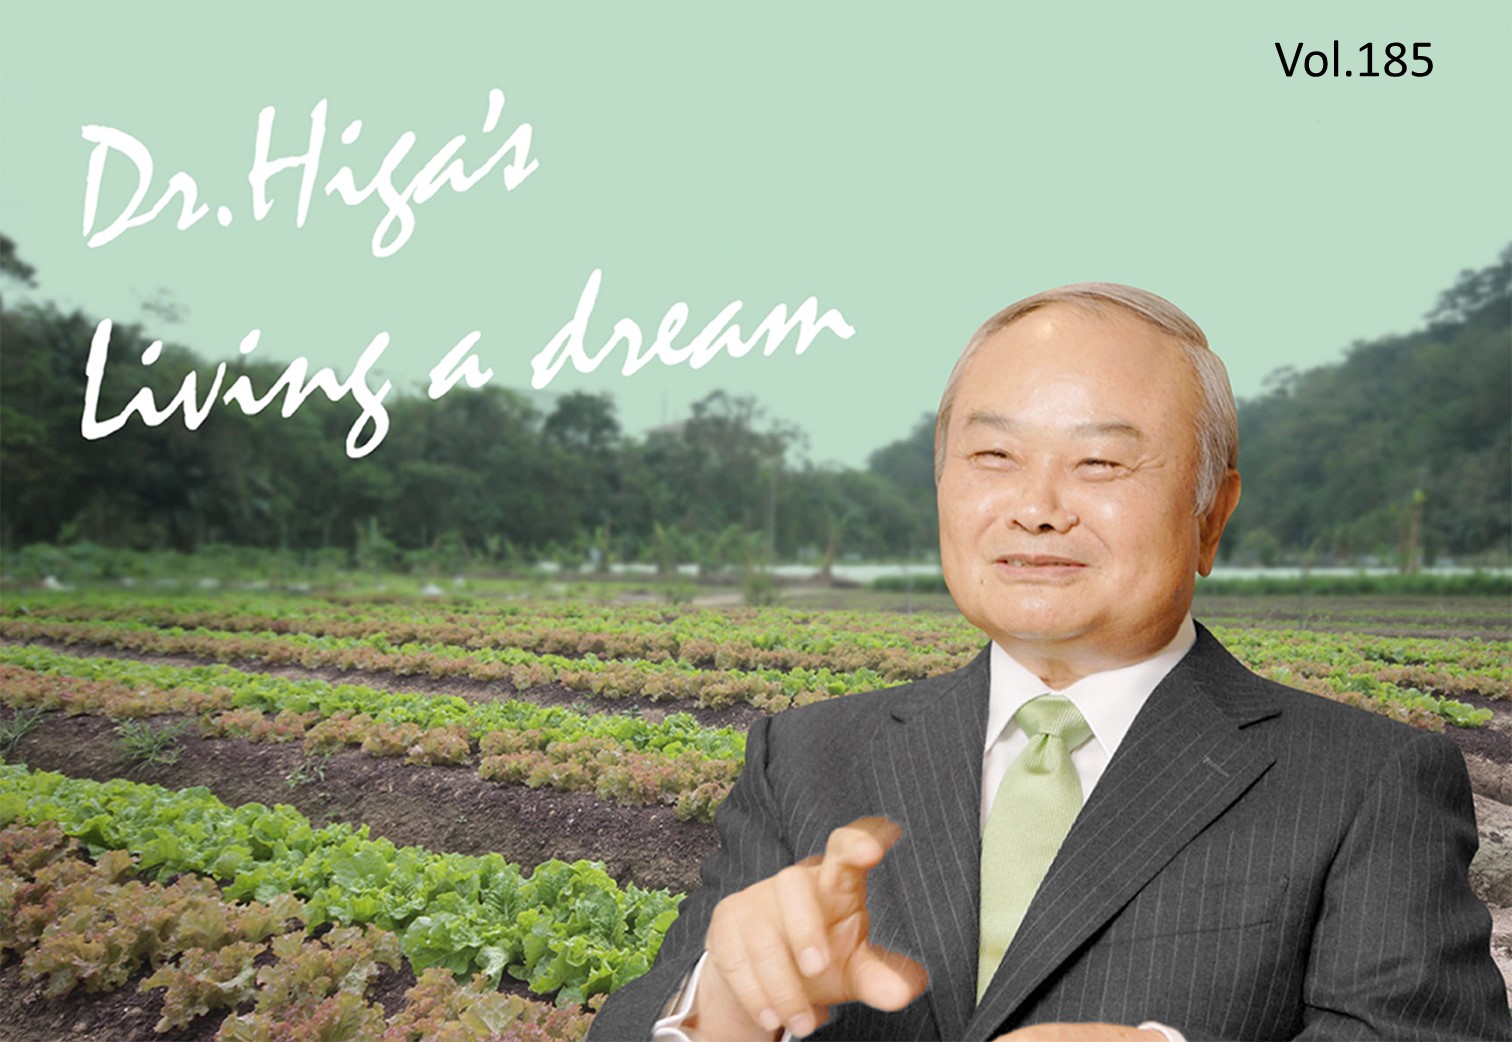 Dr. Higa's "Living a Dream": the latest article #185 is up!!!